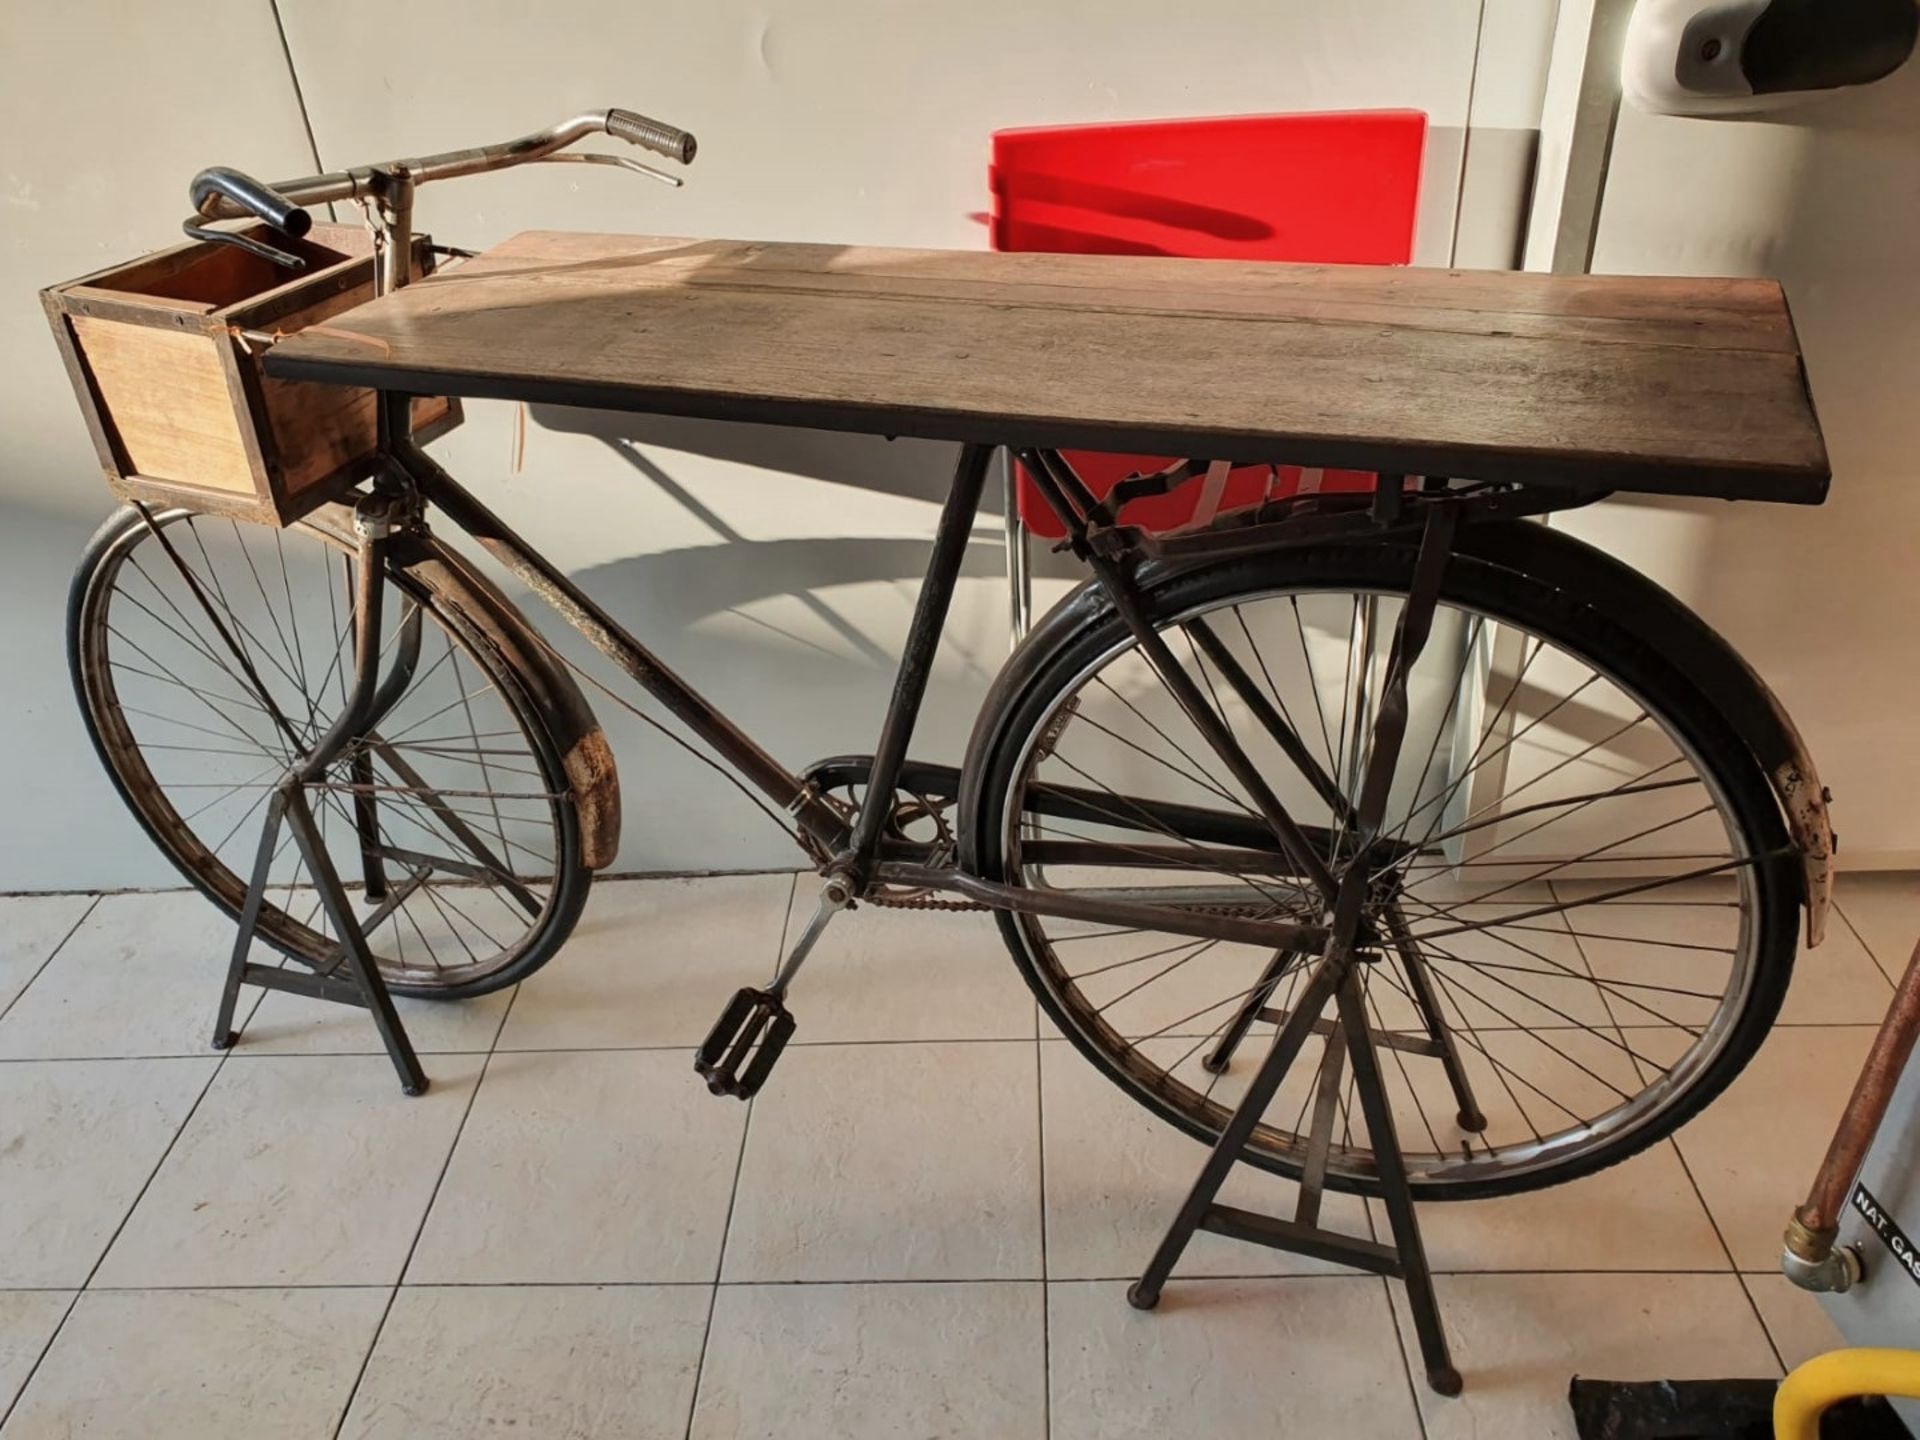 1 x Vintage Delivery Bicycle Display Table / Prop - Ref: UK - CL482 - Location: Altrincham